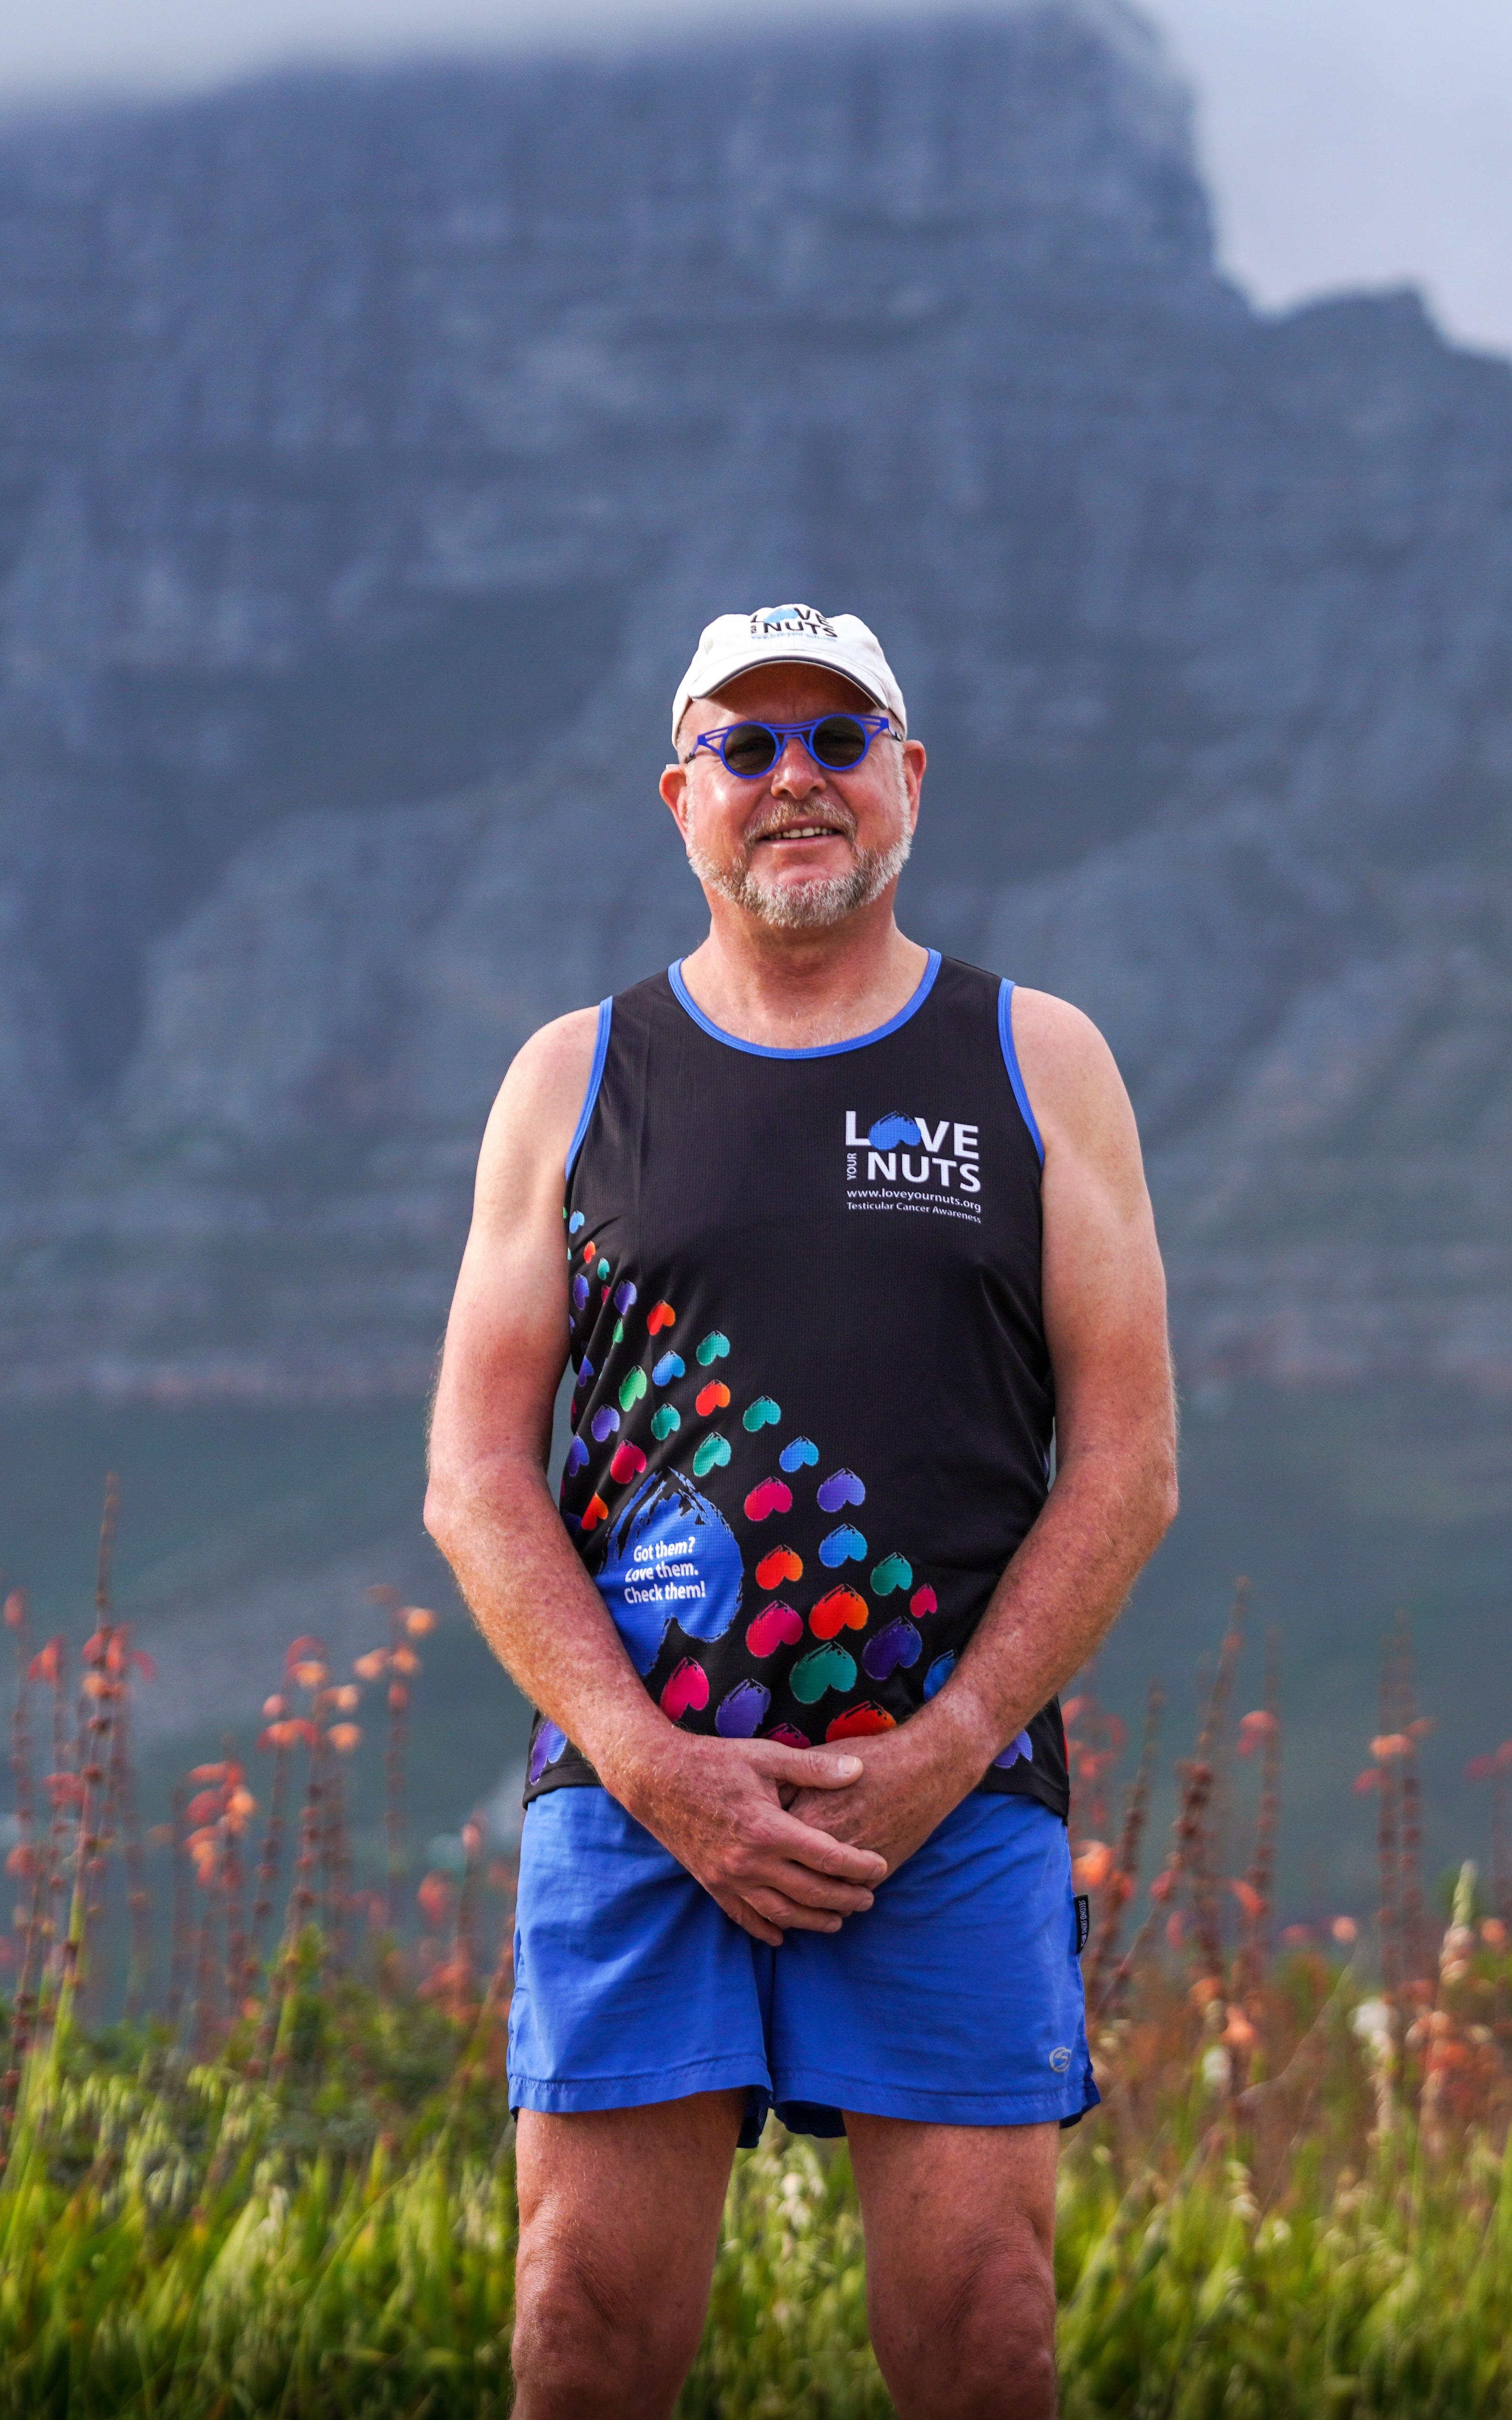 Beautiful News-Man in running gear standing in front of Table Mountain